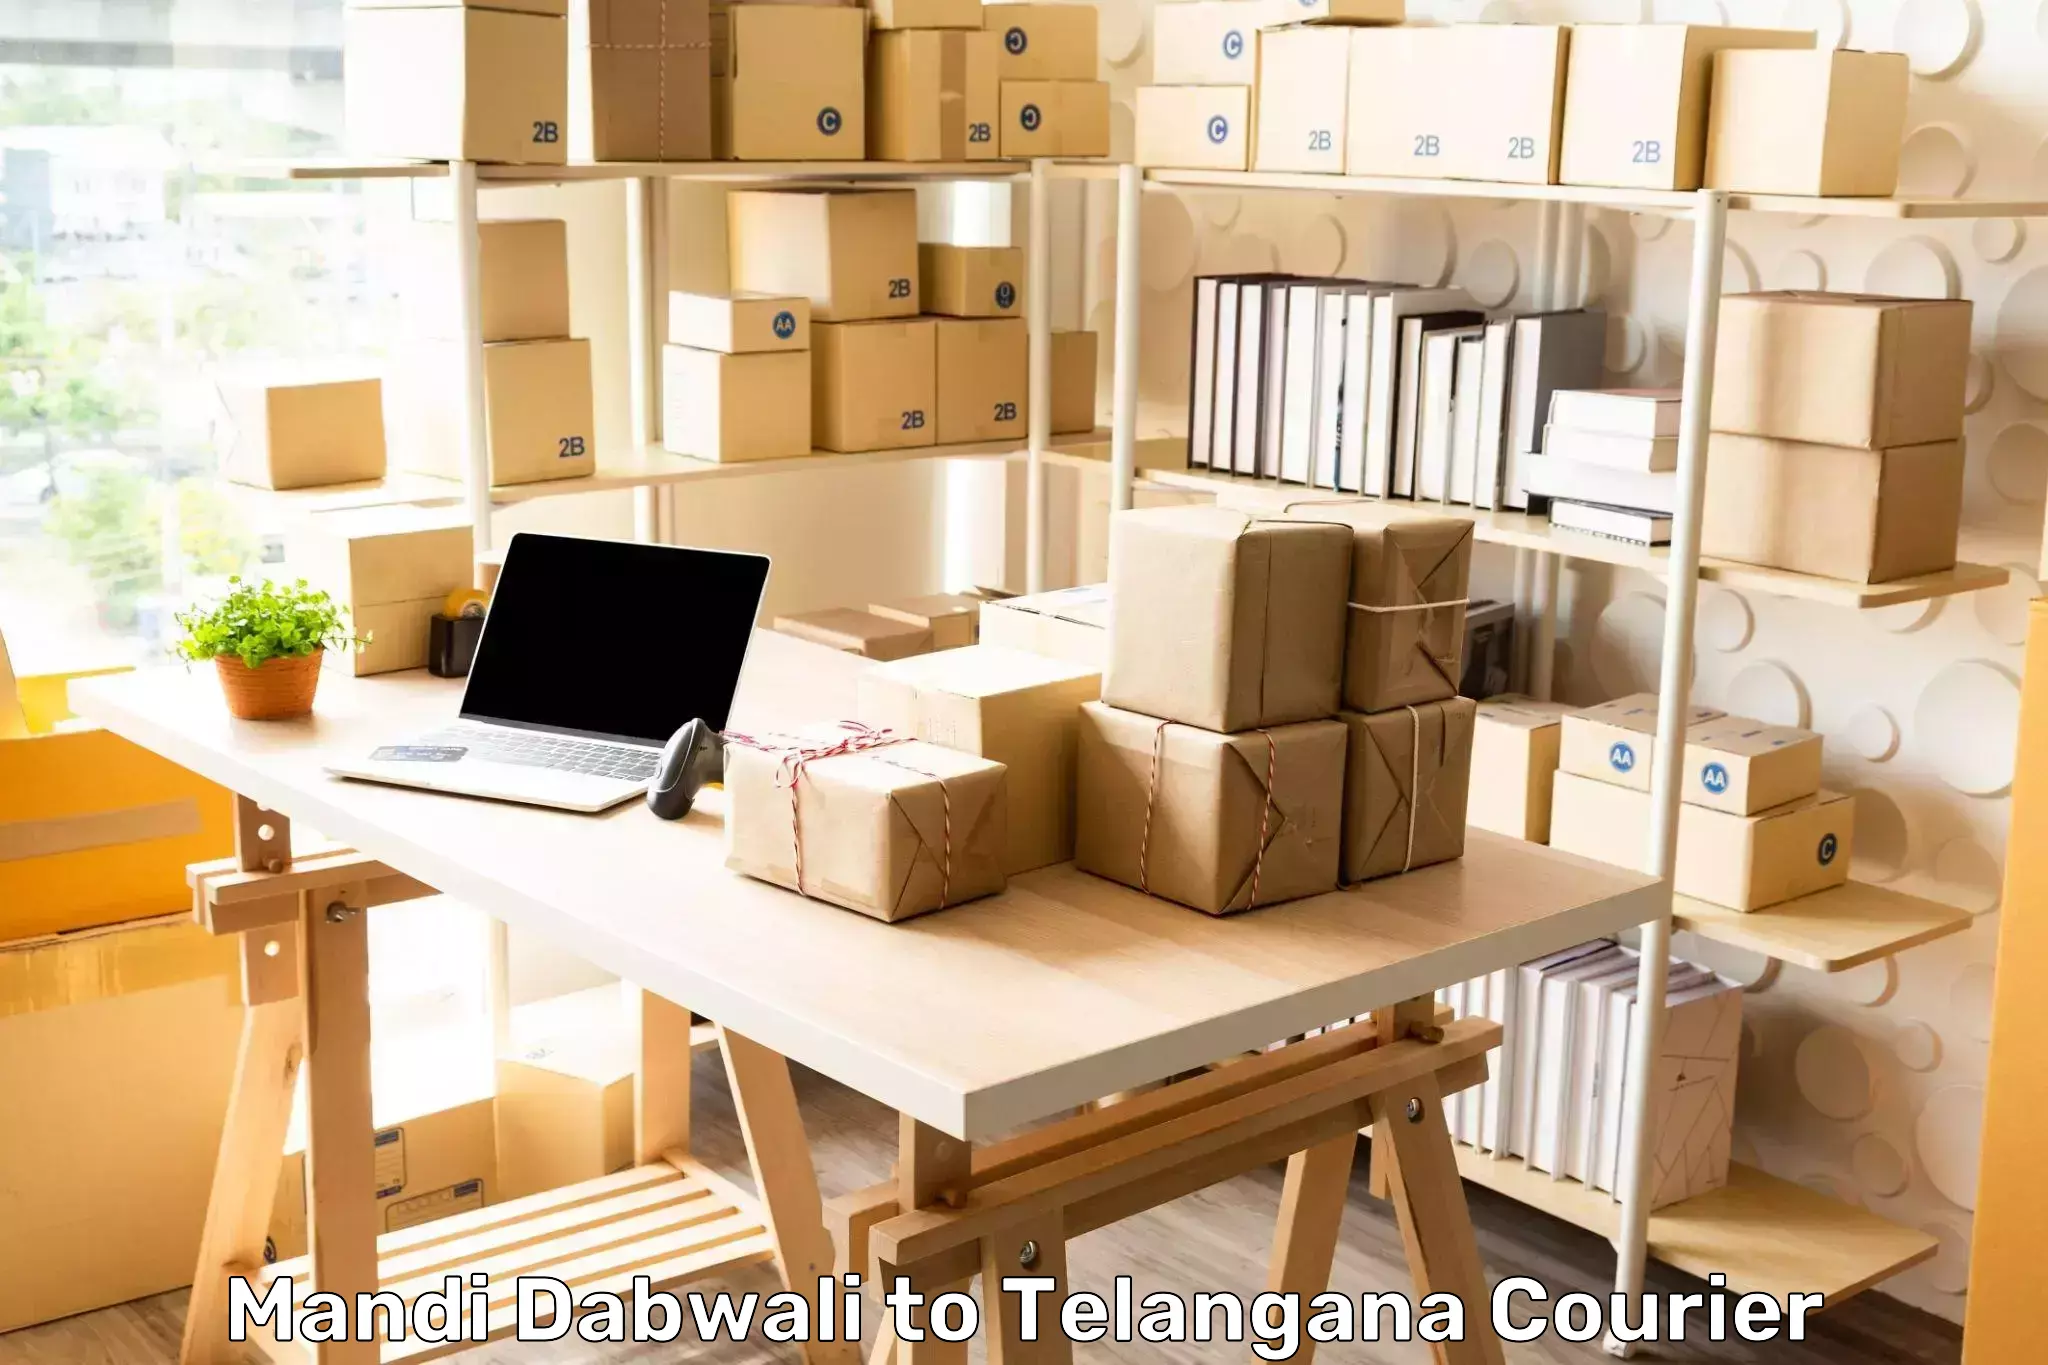 Reliable courier services in Mandi Dabwali to Mancherial